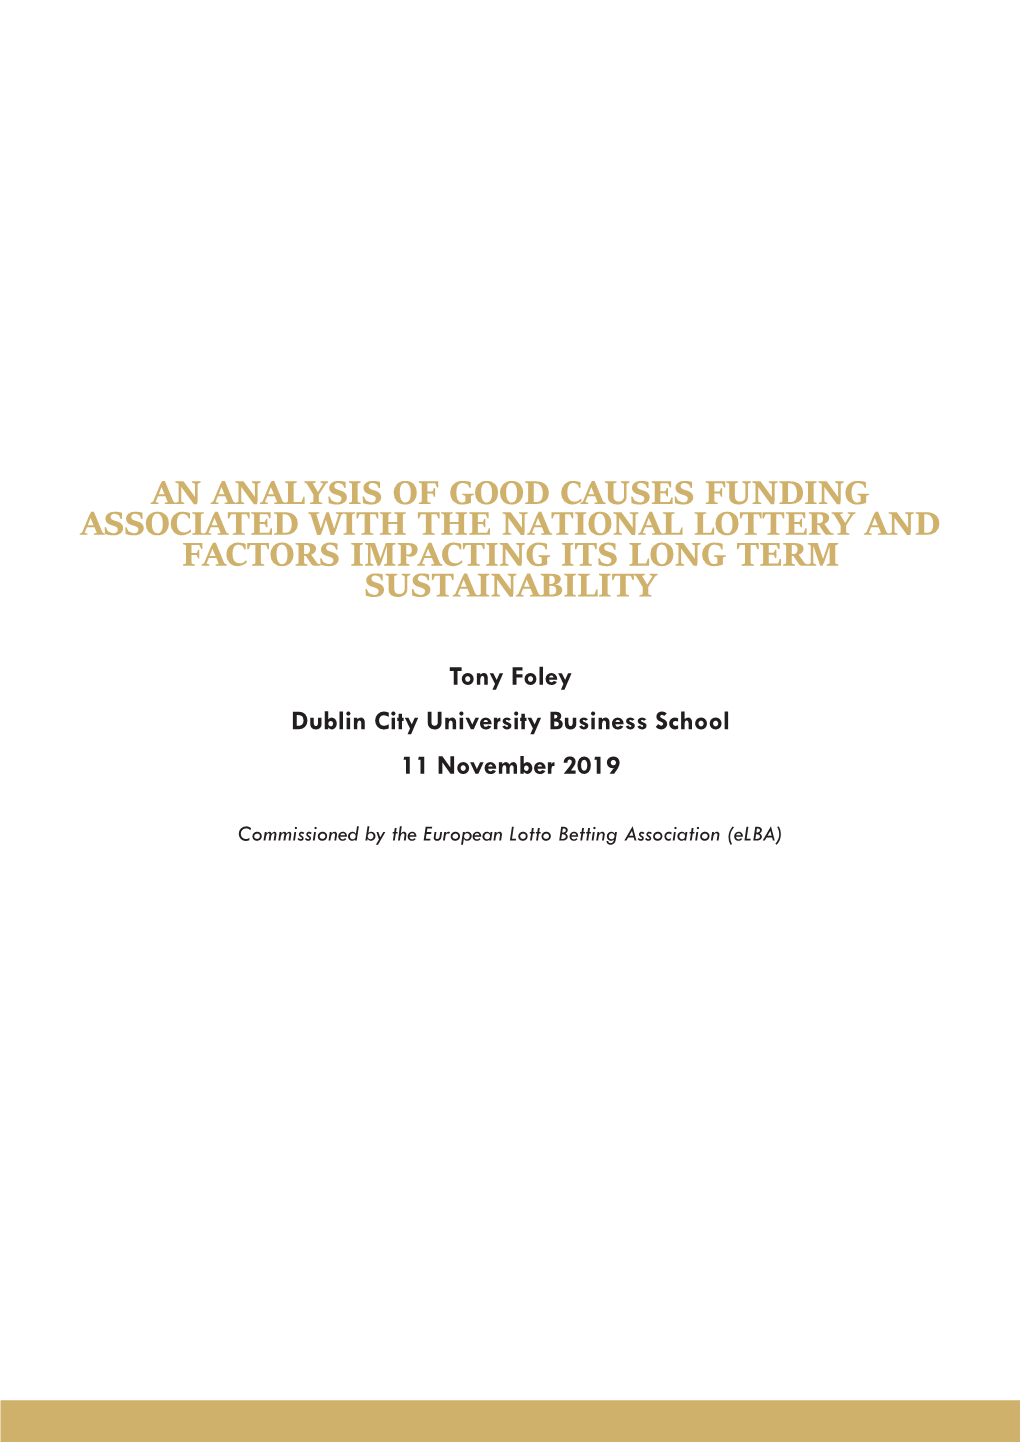 An Analysis of Good Causes Funding Associated with the National Lottery and Factors Impacting Its Long Term Sustainability